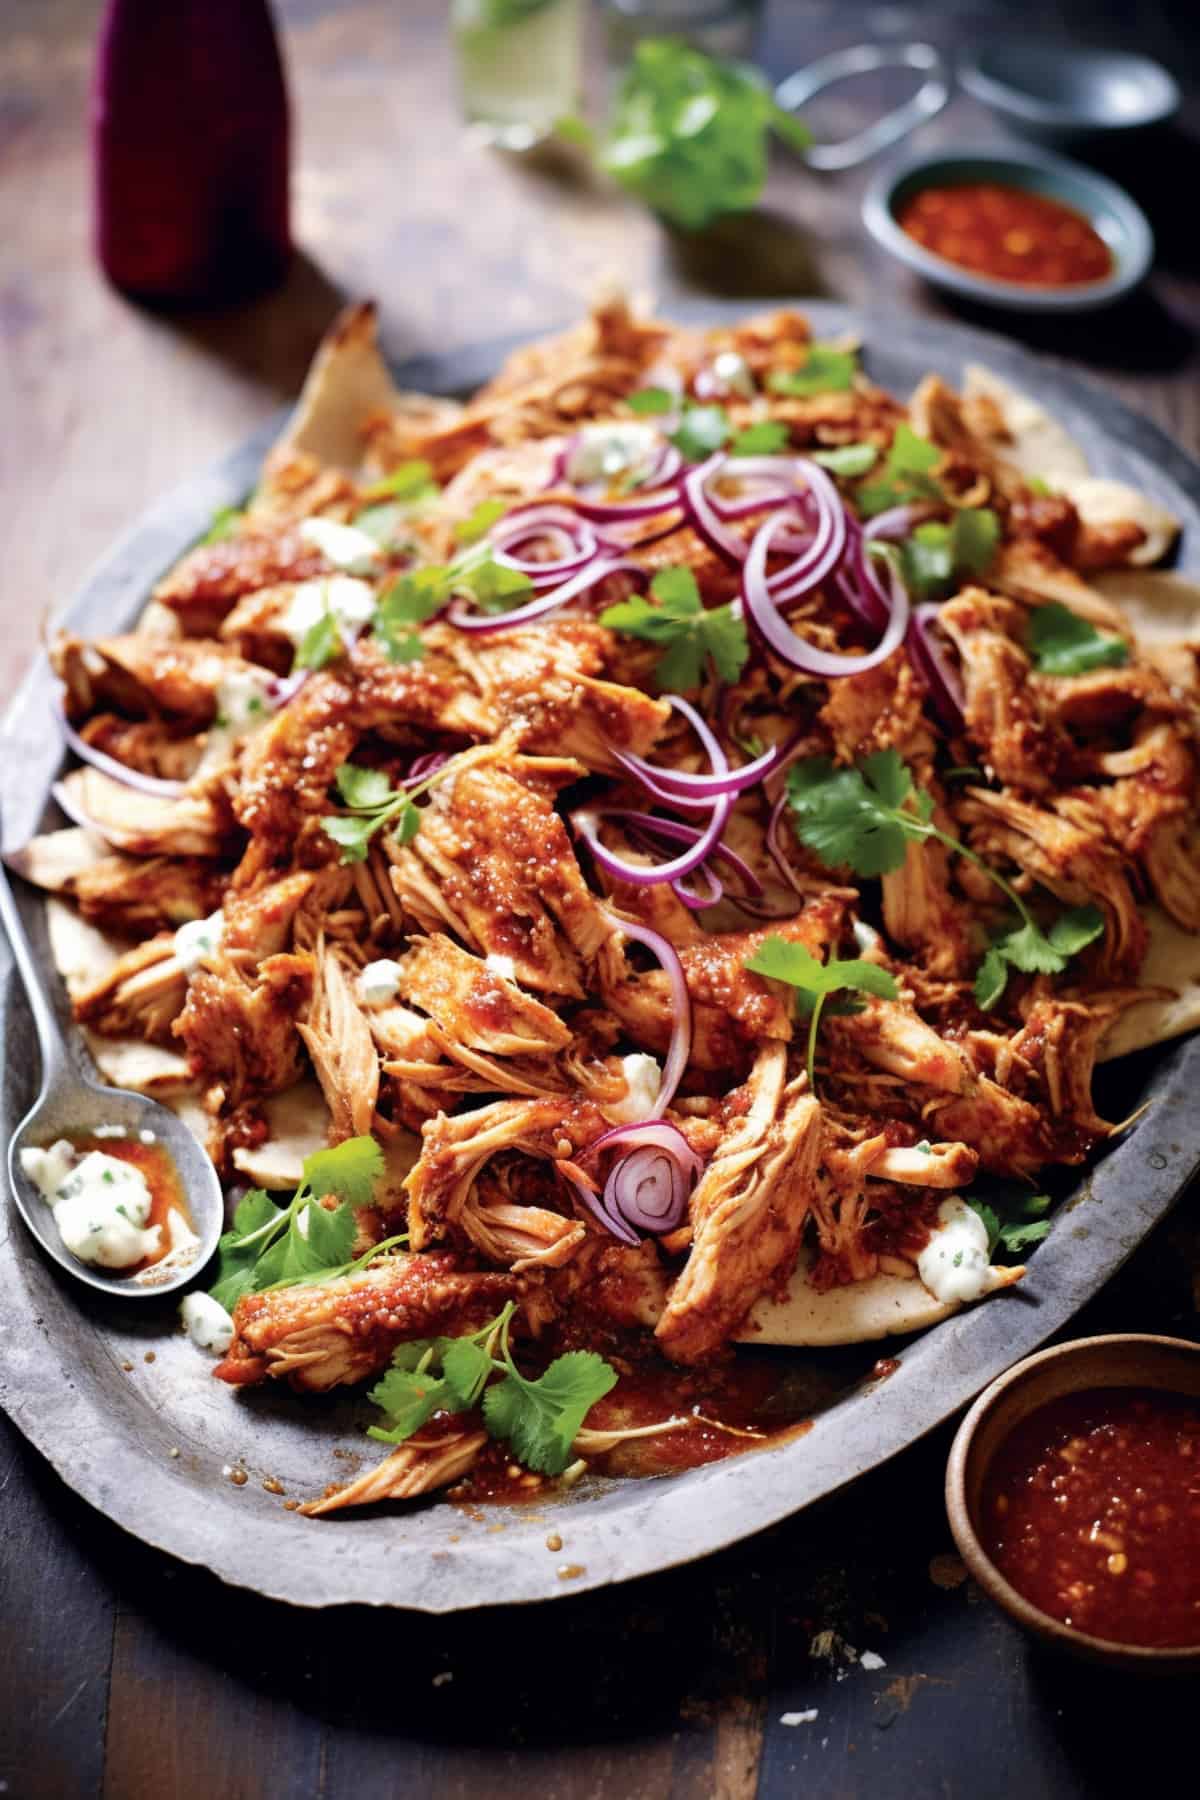 Platter of BBQ pulled chicken with BBQ sauce.